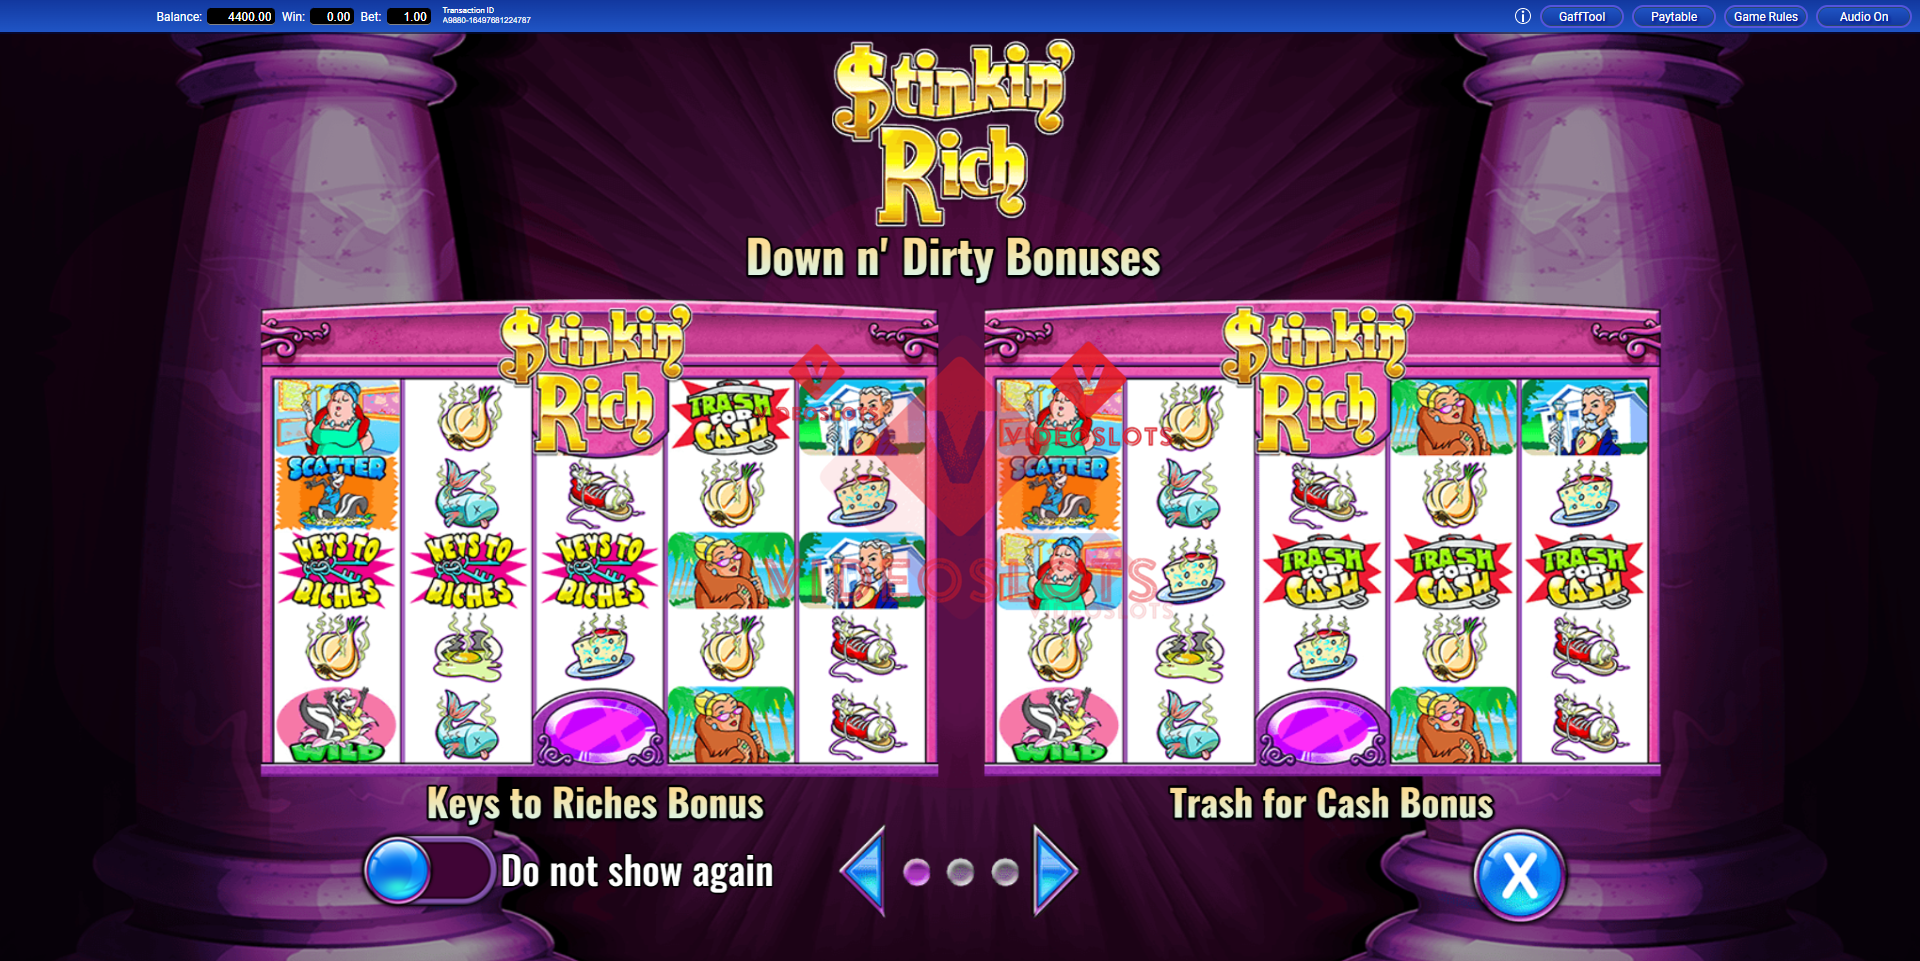 Game Intro for Stinkin' Rich slot from IGT